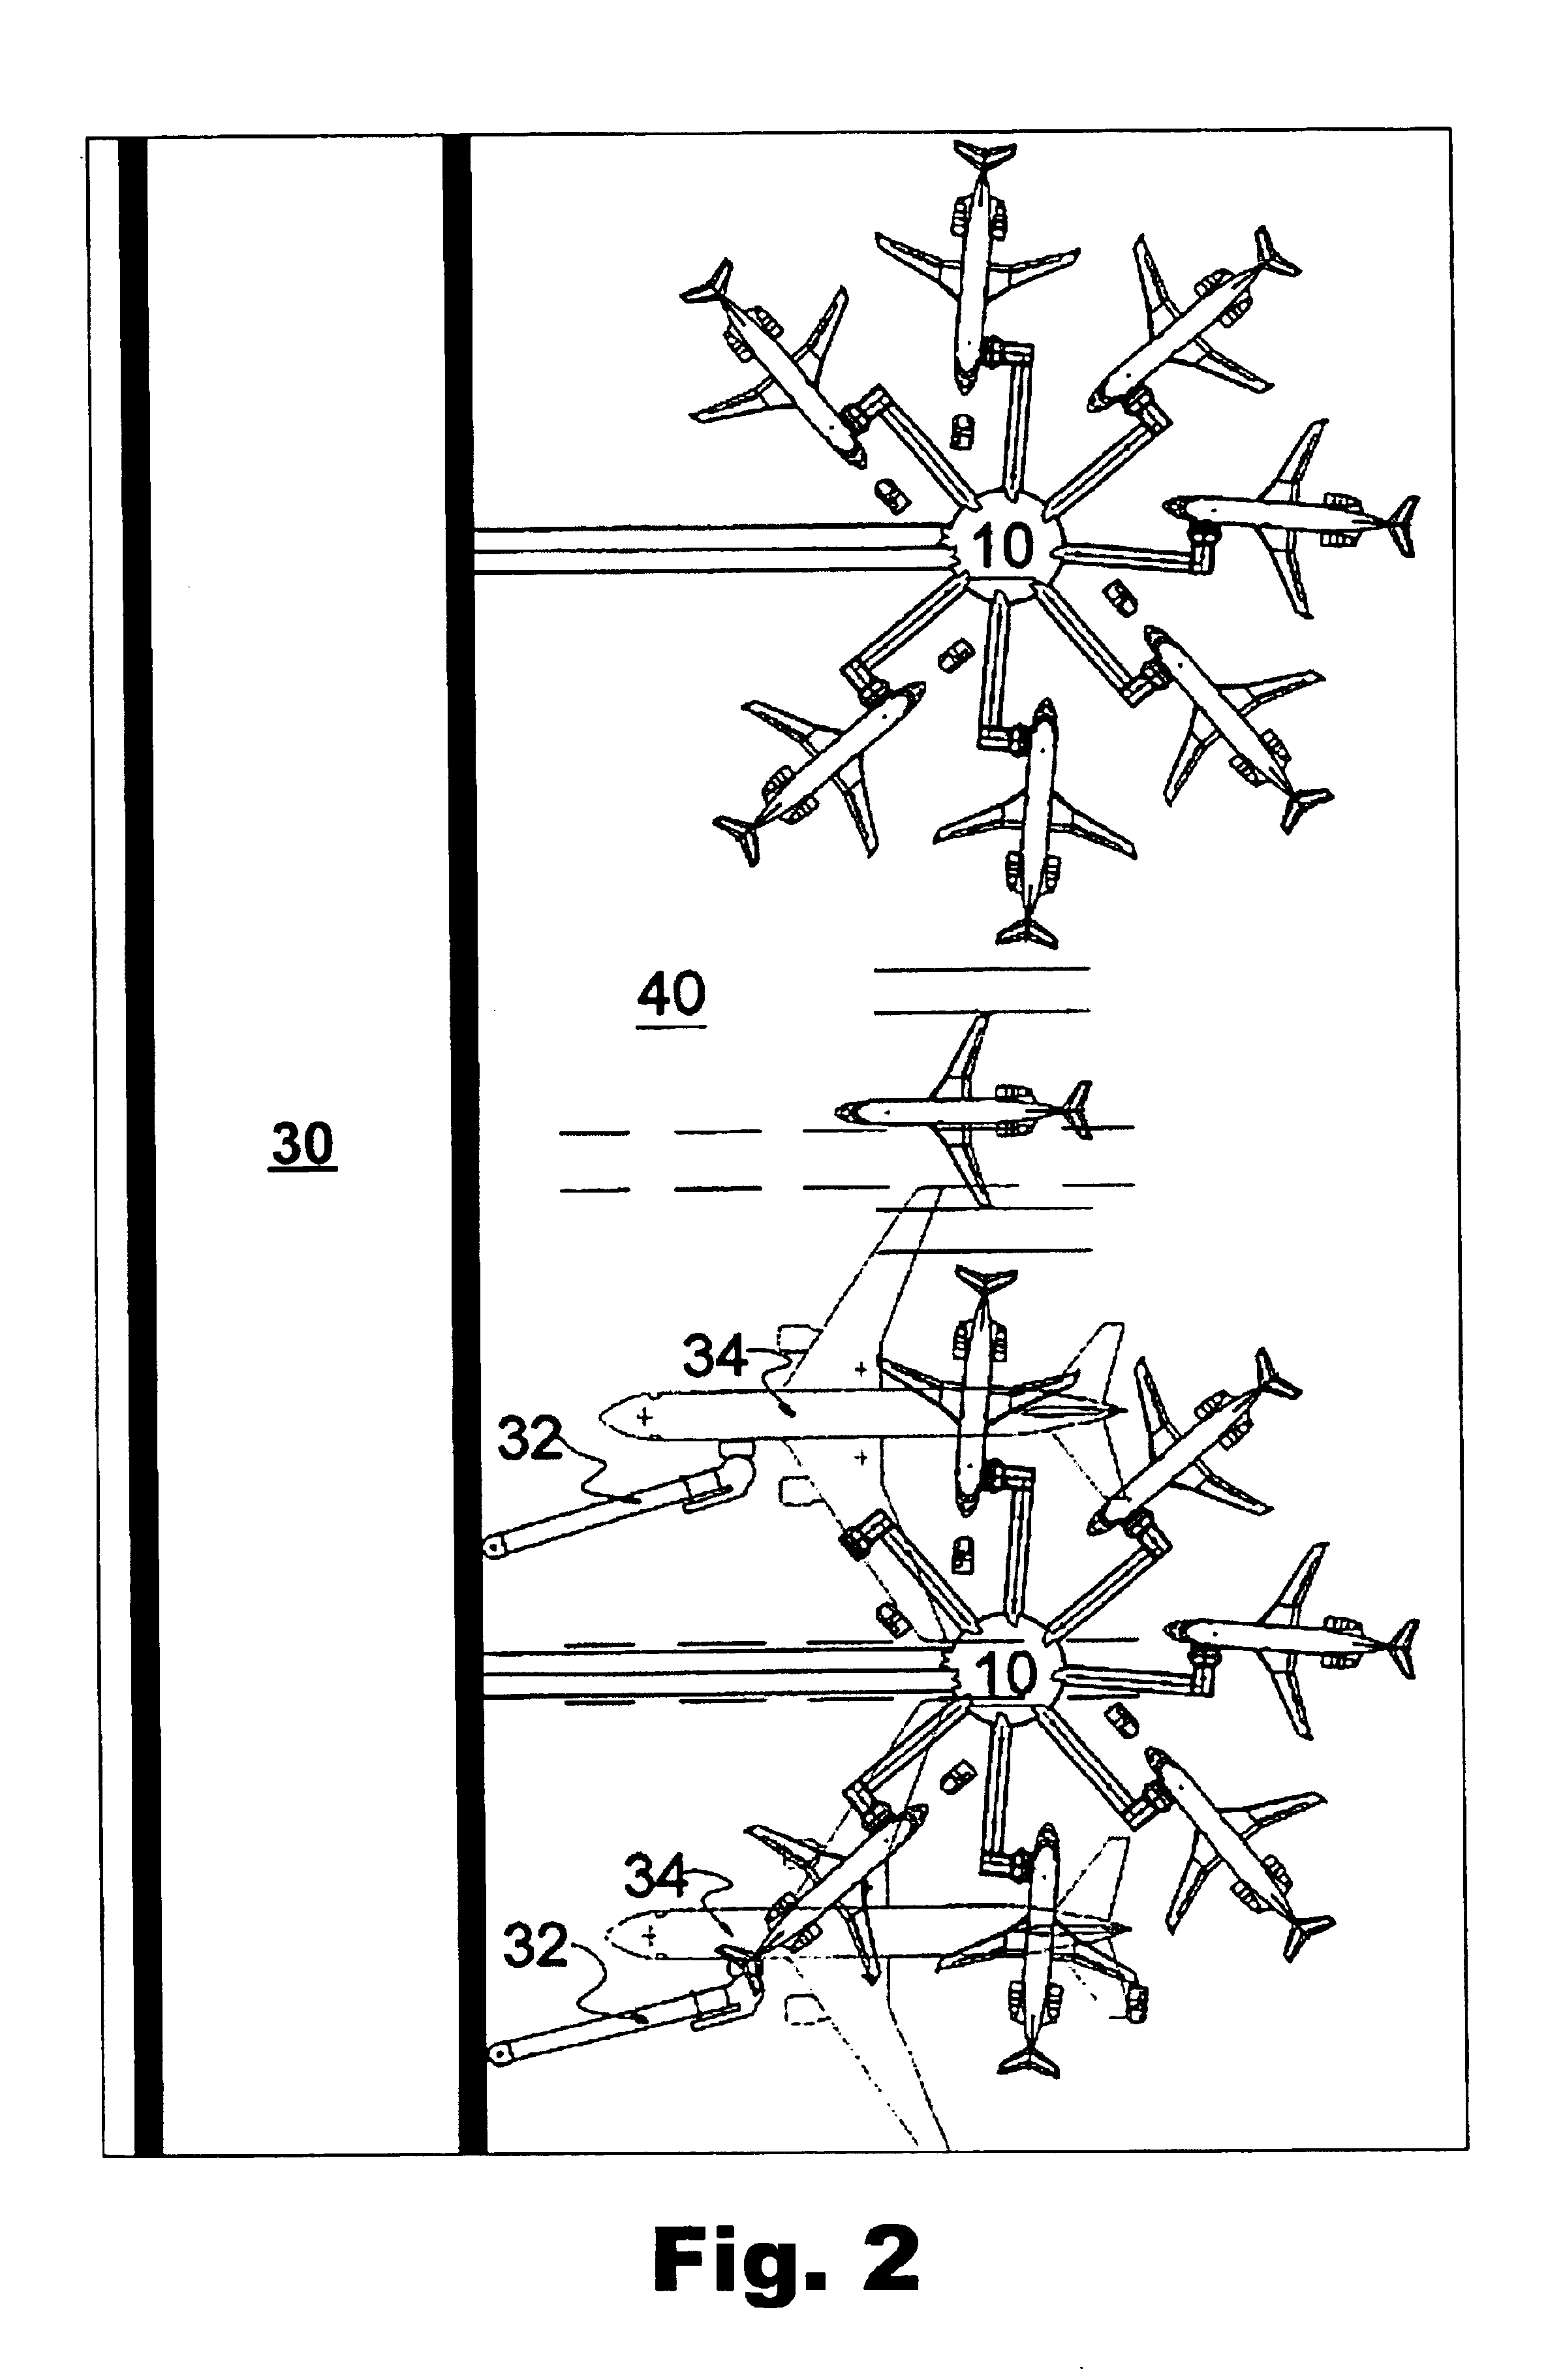 Method of boarding passengers on regional aircraft and transferring passengers between a regional aircraft and larger aircraft